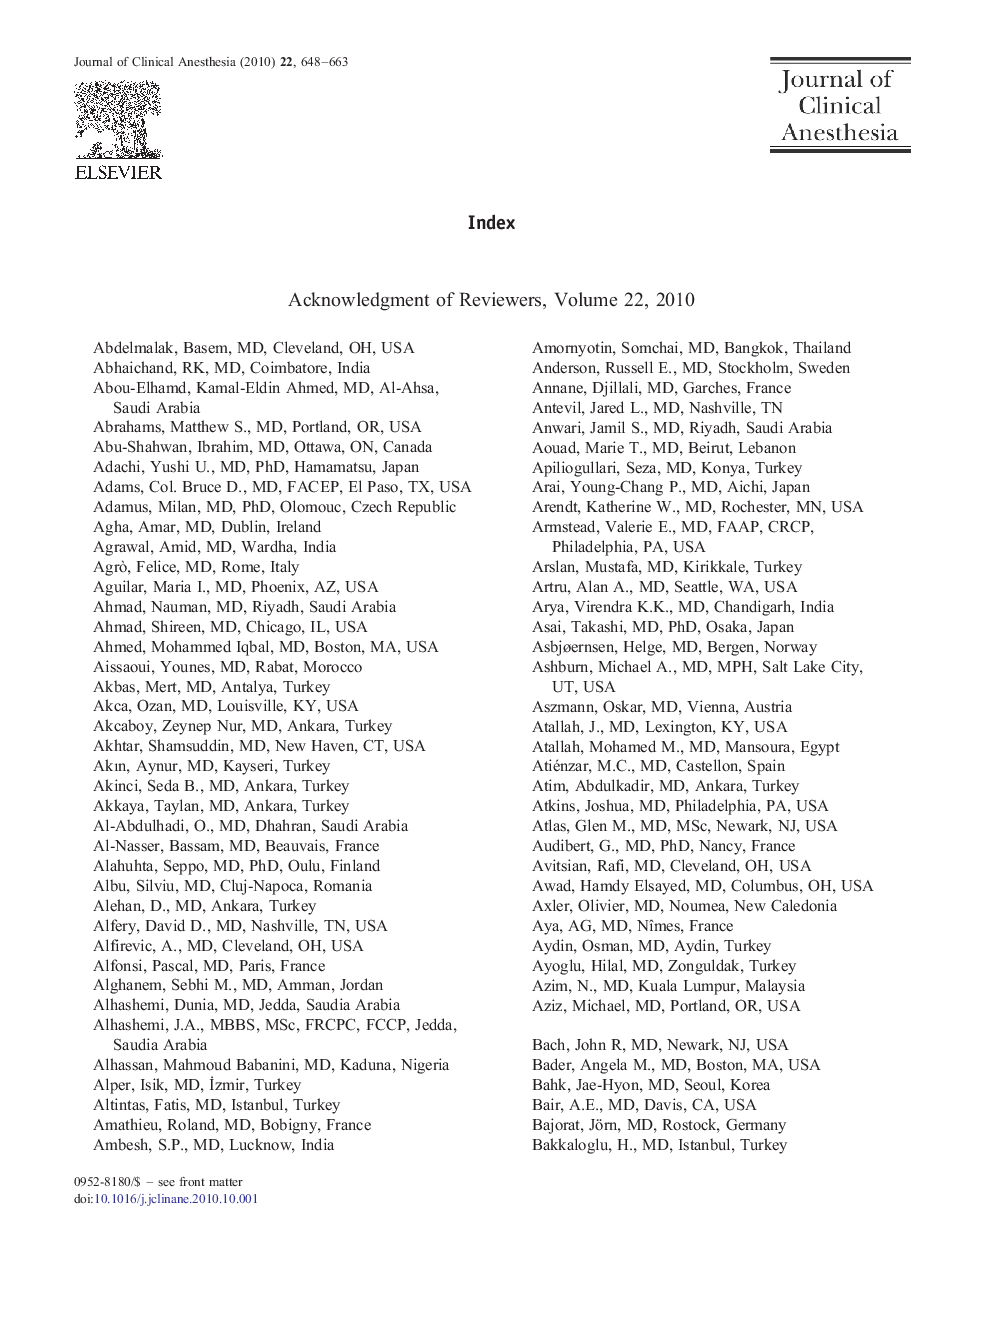 Acknowledgment of Reviewers, Volume 22, 2010